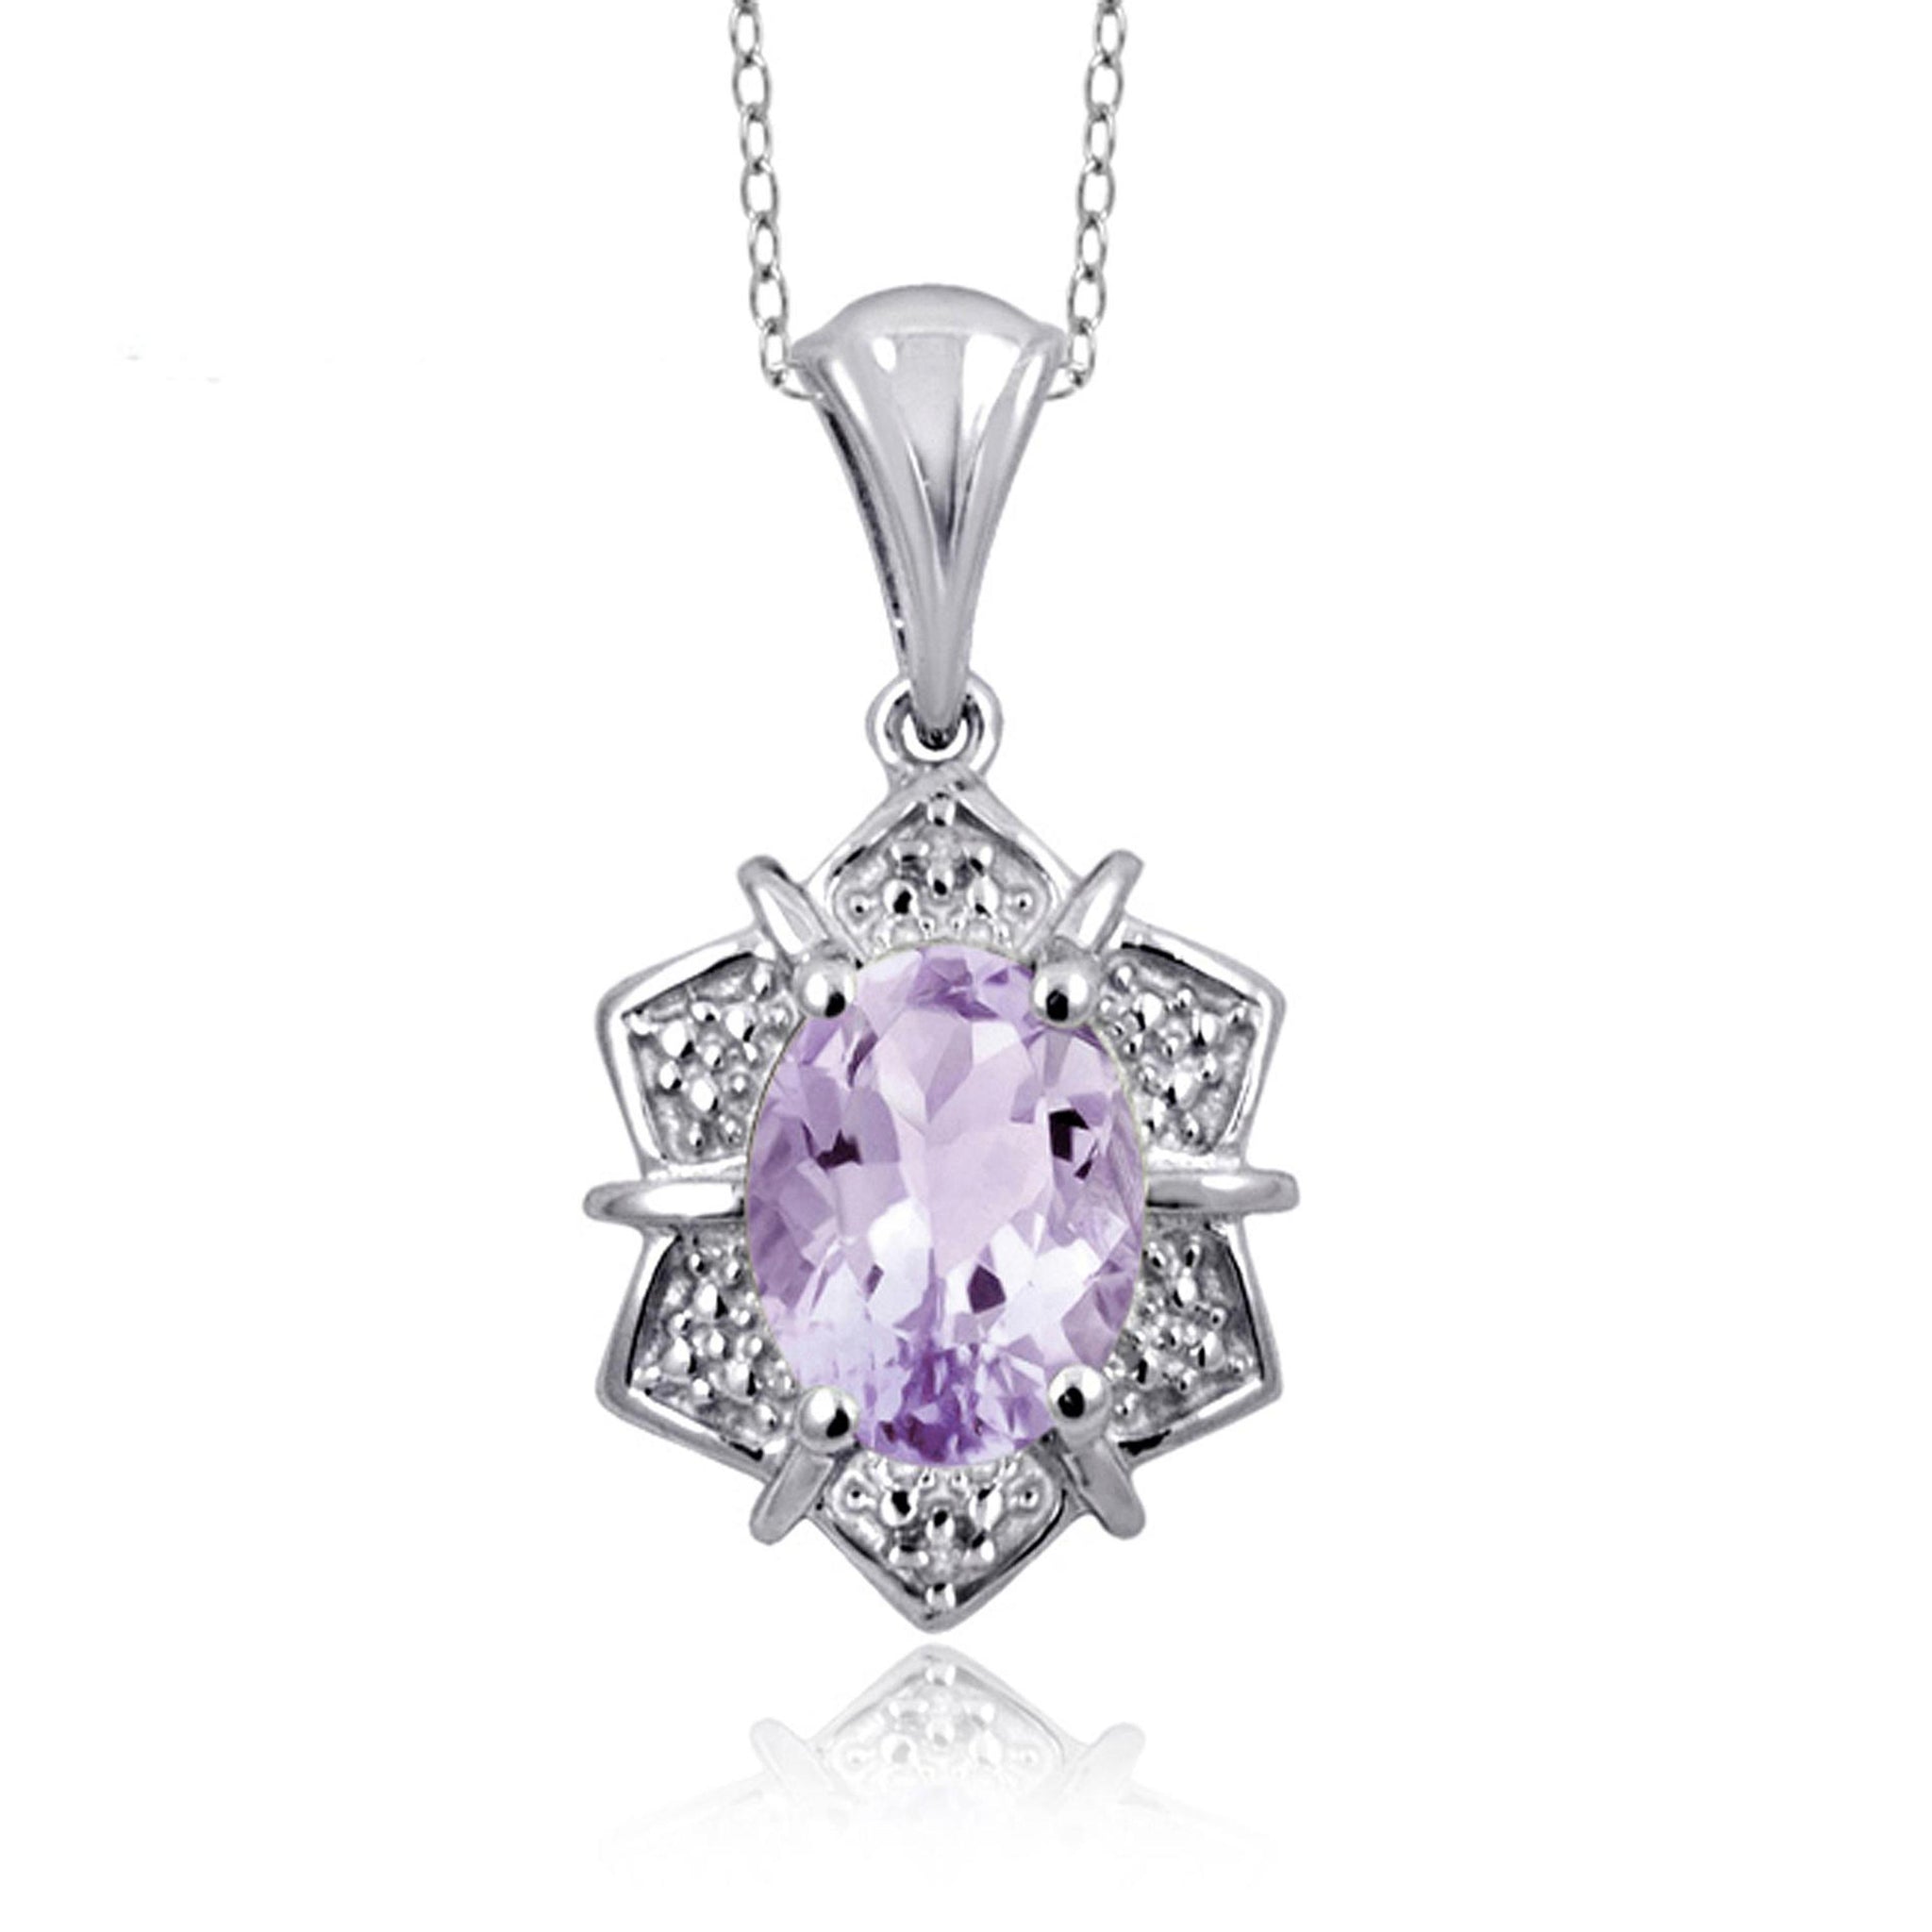 JewelonFire 1.00 Carat T.G.W. Pink Amethyst And White Diamond Accent Sterling Silver Pendant - Assorted Colors